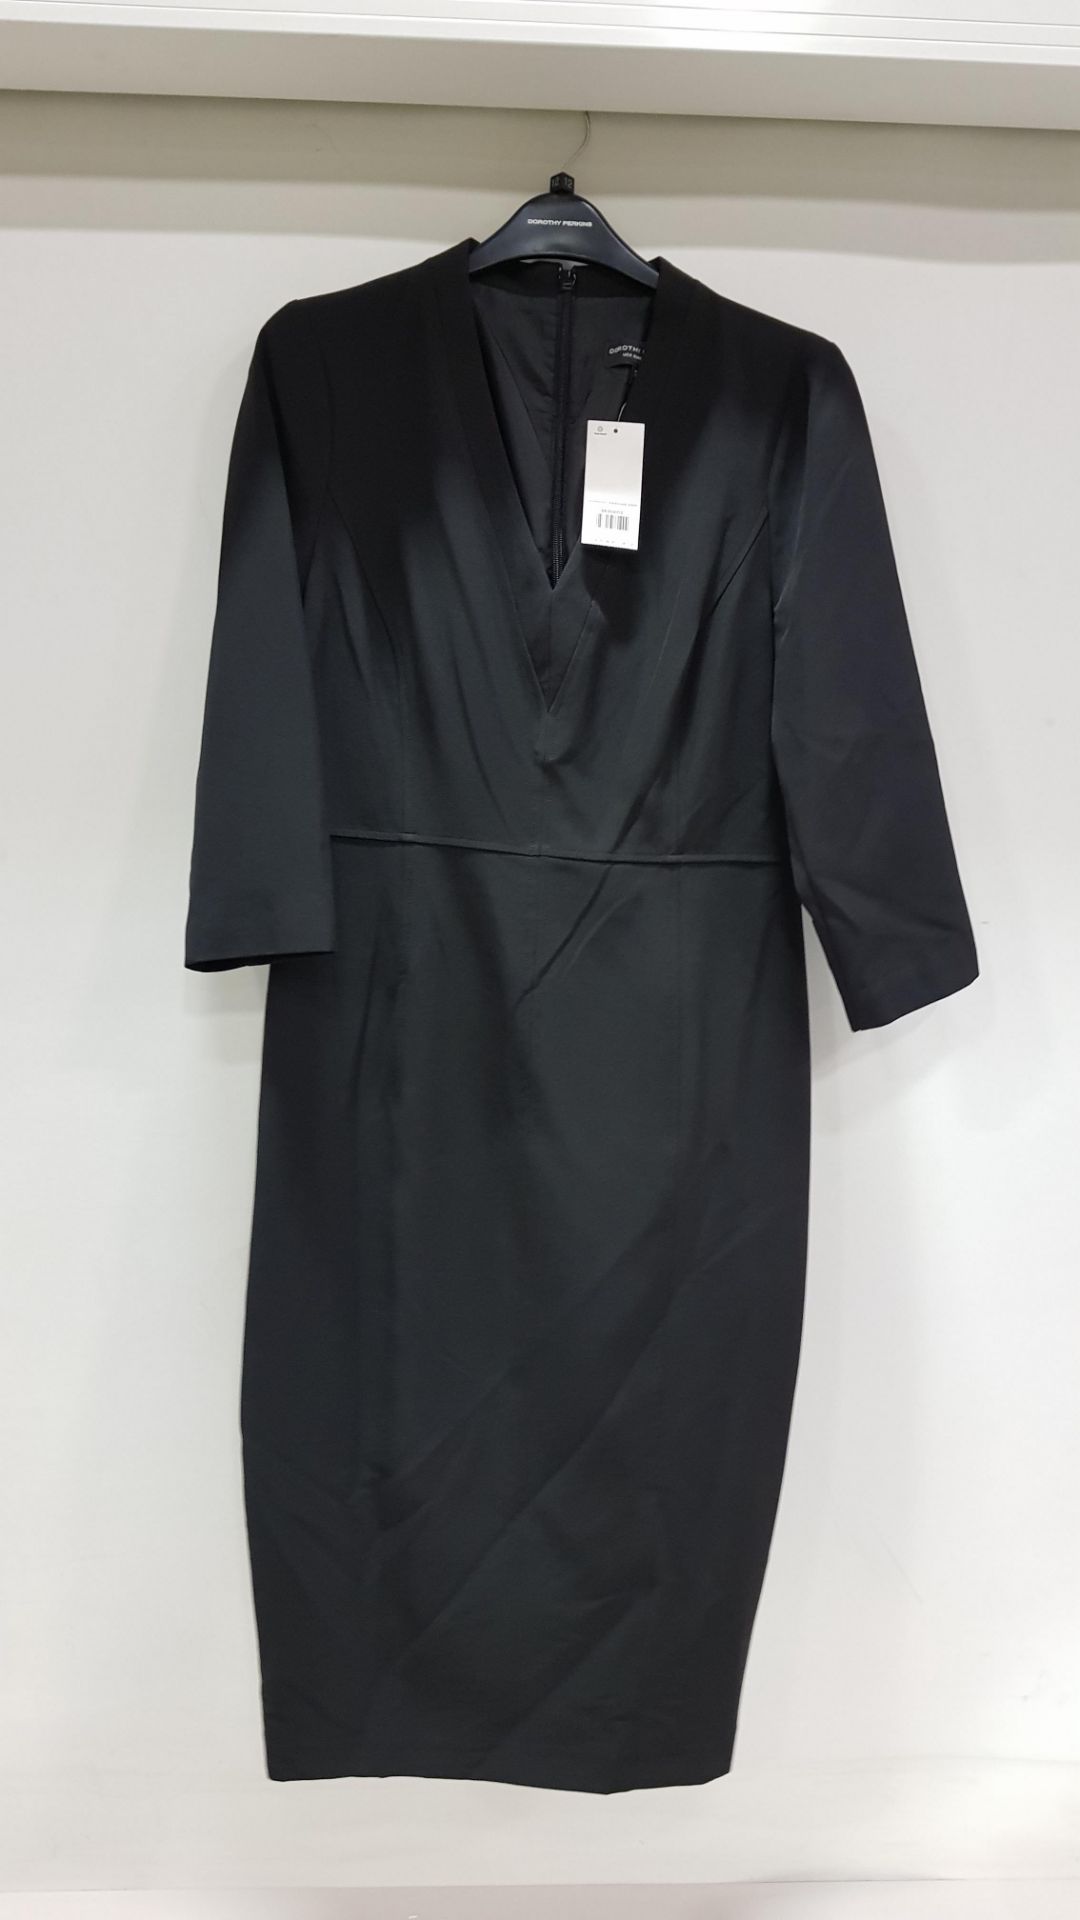 25 X BRAND NEW TOPSHOP BLACK DRESSES IN VARIOUS SIZES I.E 6, 8, 10,12 AND 14